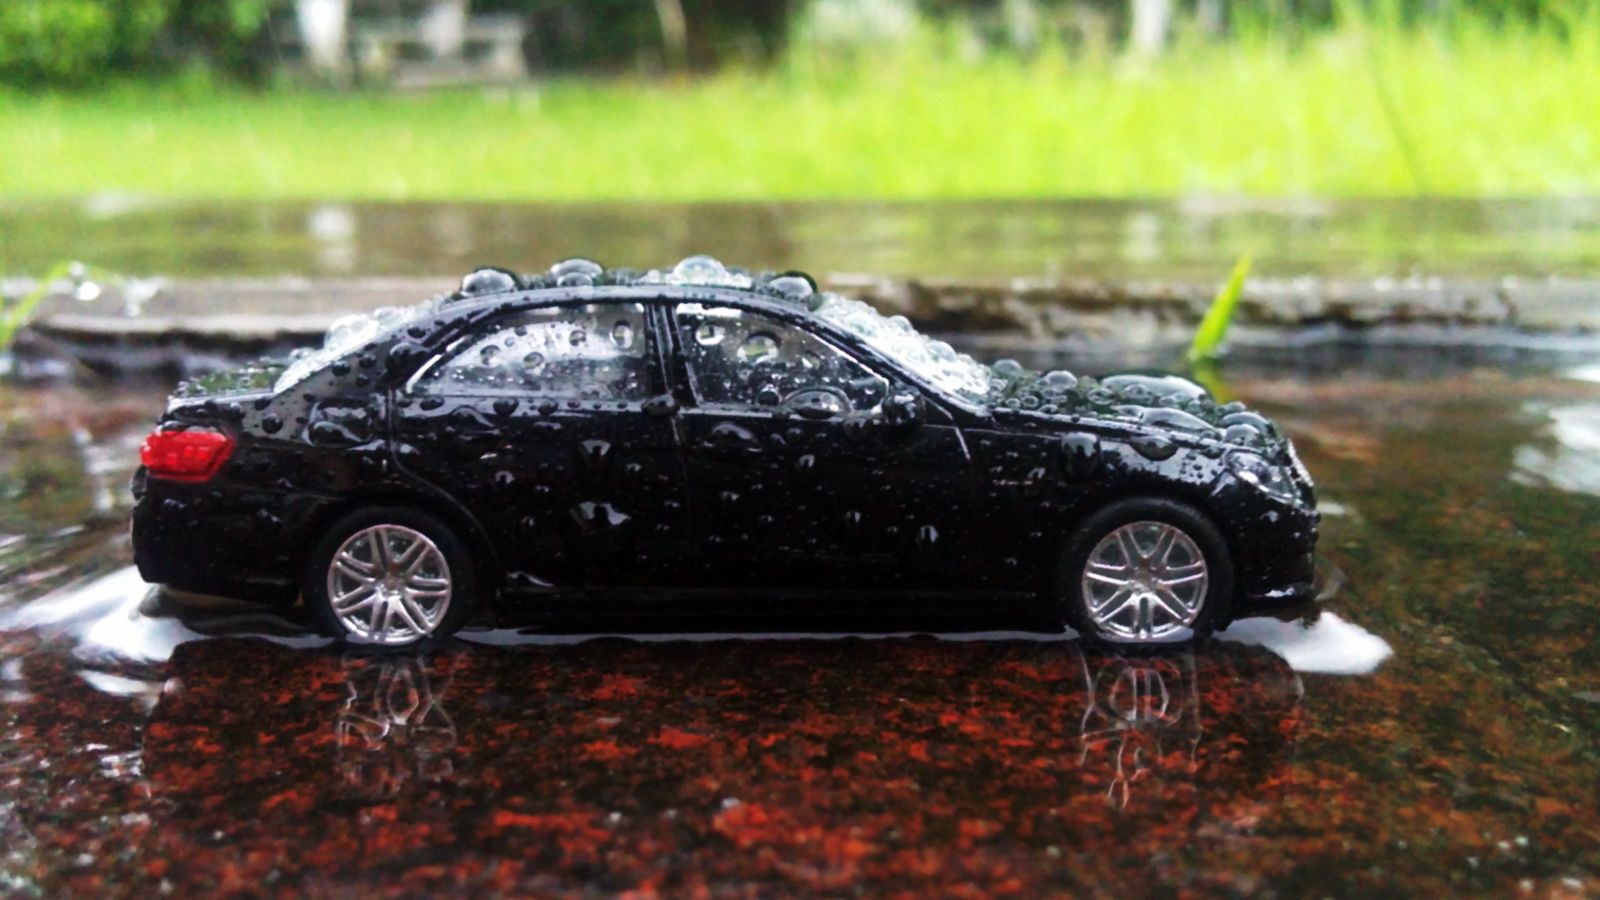 Illustration for article titled Review: Mercedes-Benz E63 AMG 1:64 by RMZ City.